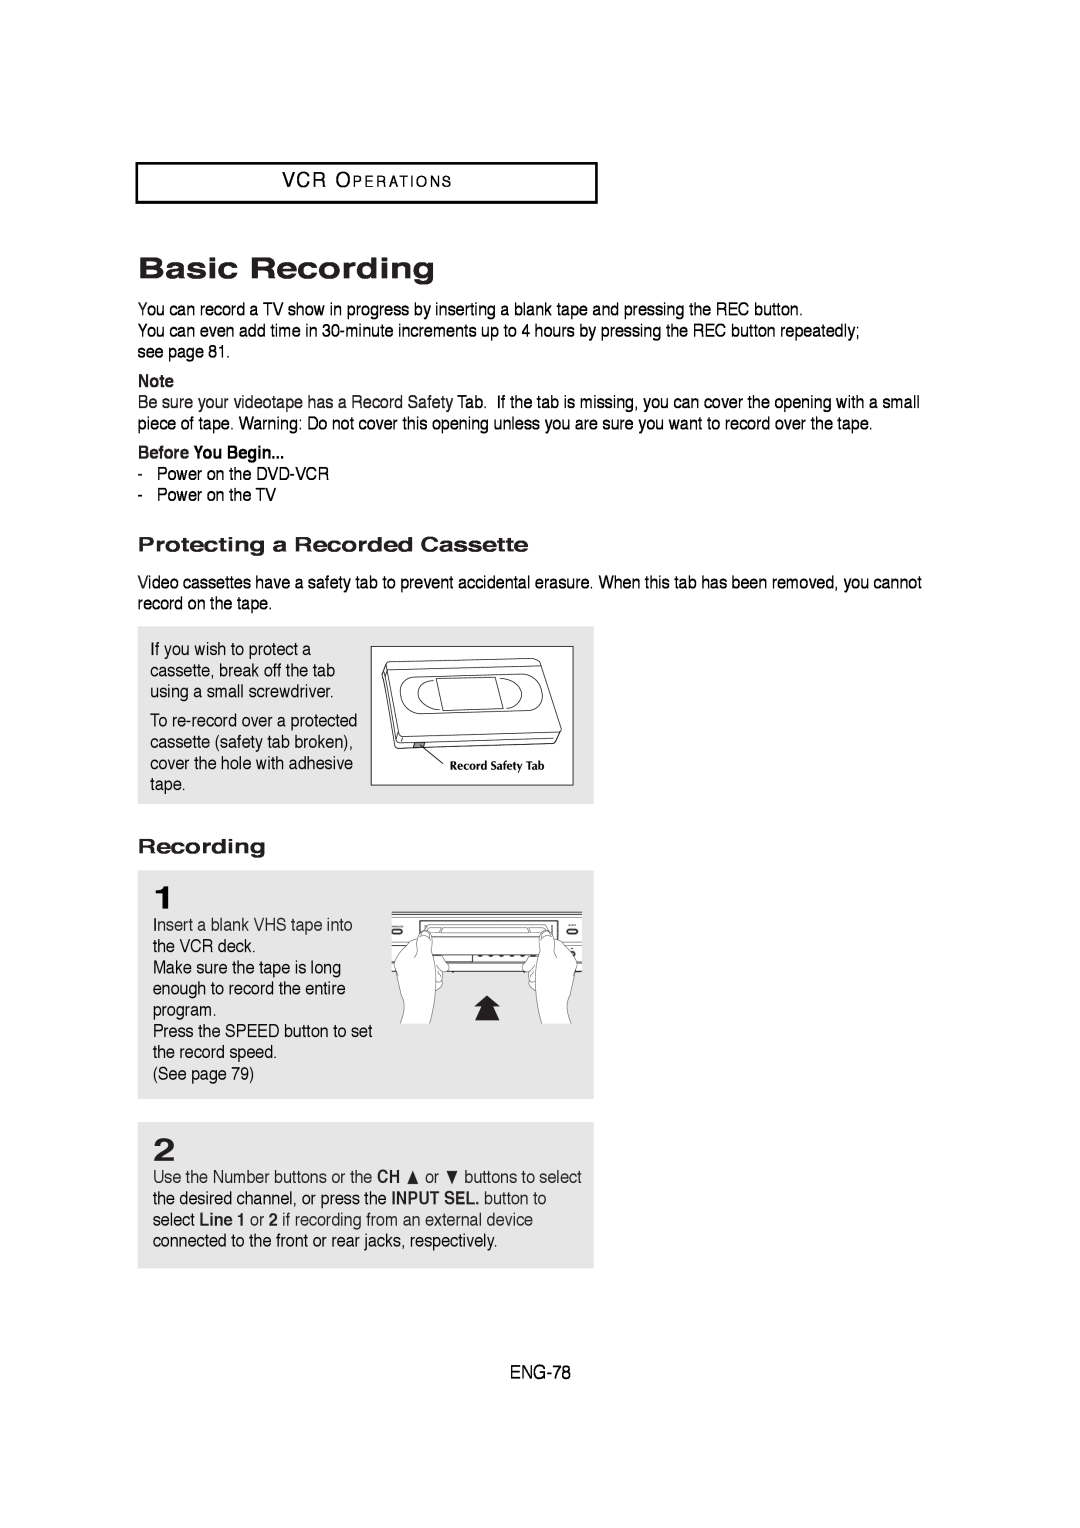 Samsung V6700-XAC, AK68-01304A, 20070205090323359 Basic Recording, Protecting a Recorded Cassette, Before You Begin 